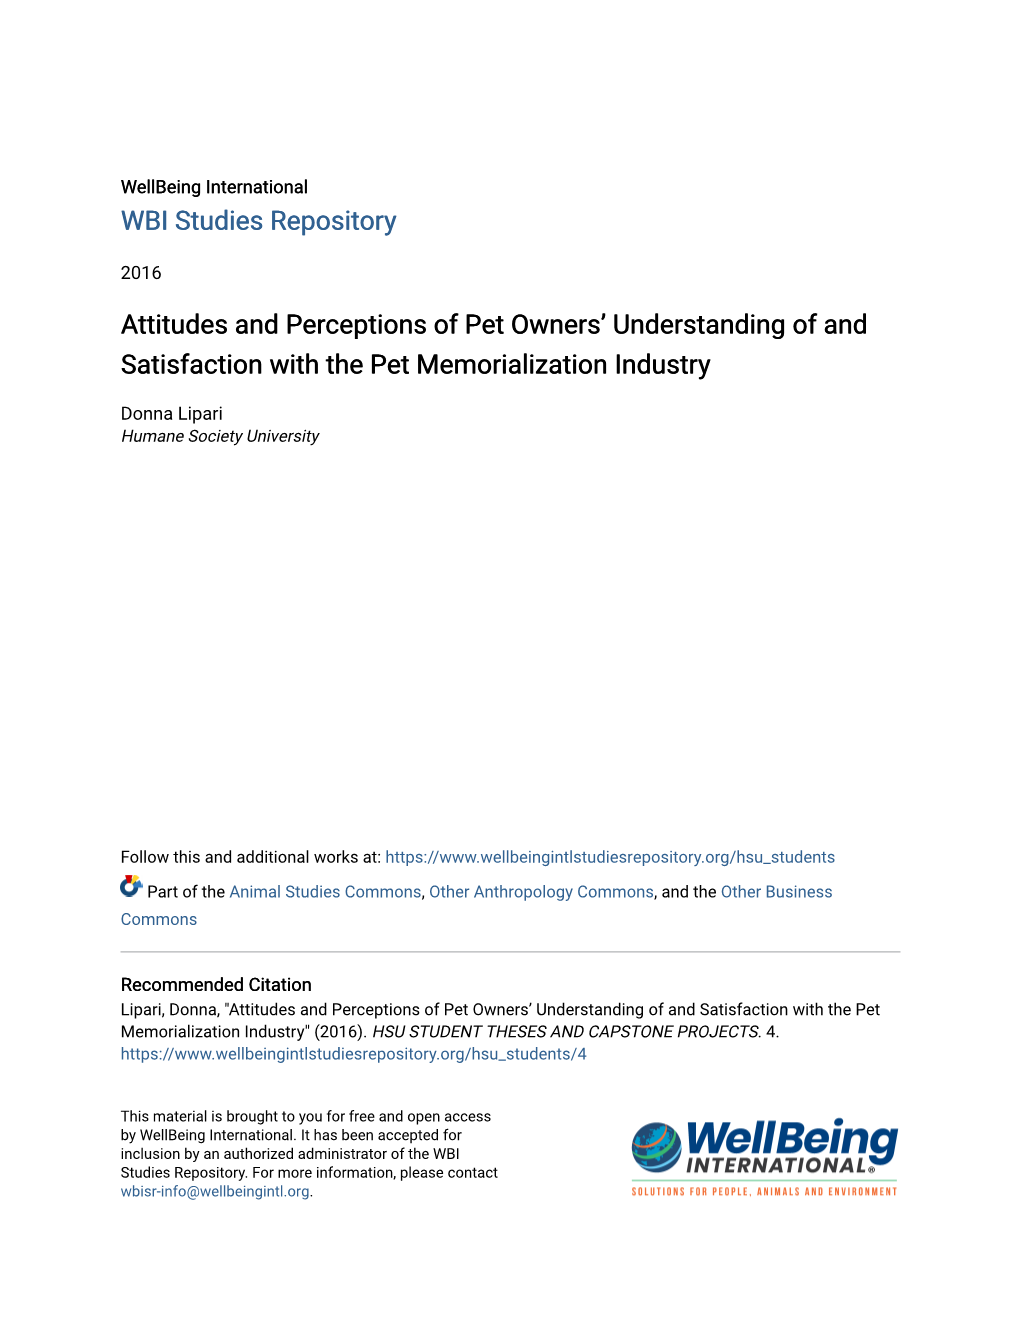 Attitudes and Perceptions of Pet Owners' Understanding of And